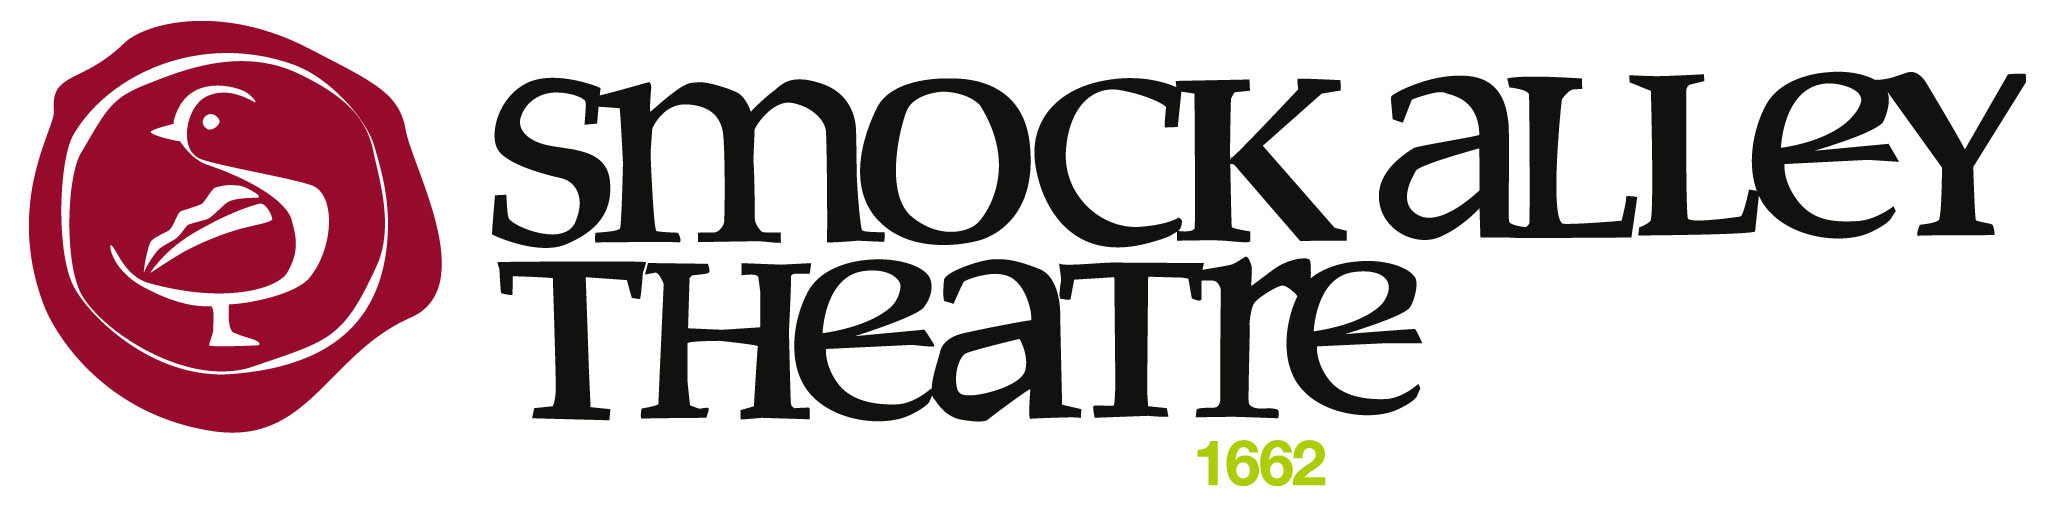 Picture of images/theatres/Dublin_Smock_Alley/SmockAlleyLogo-High-Res.jpg